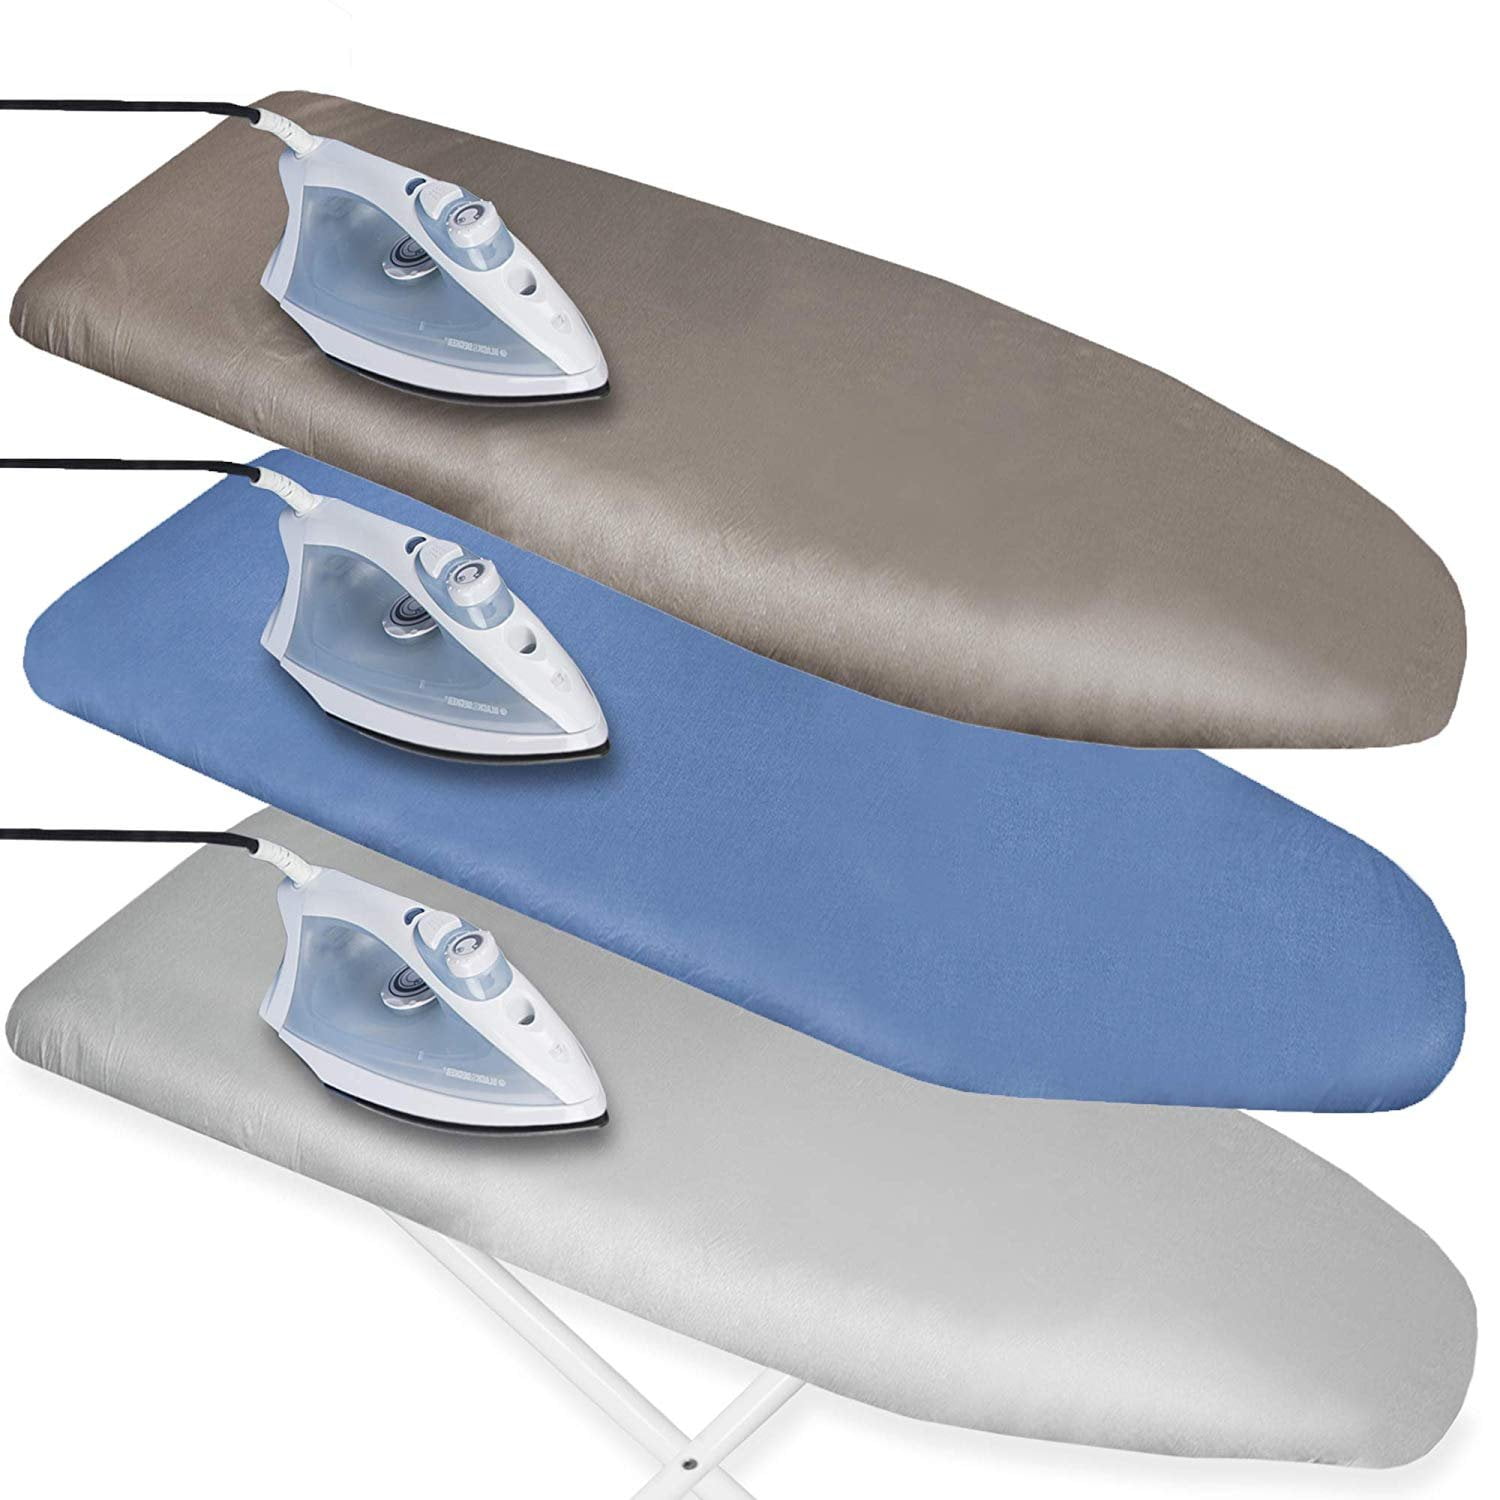 13" x 40" ironing board cover Metallic heat-reflective scorch resistant coating 